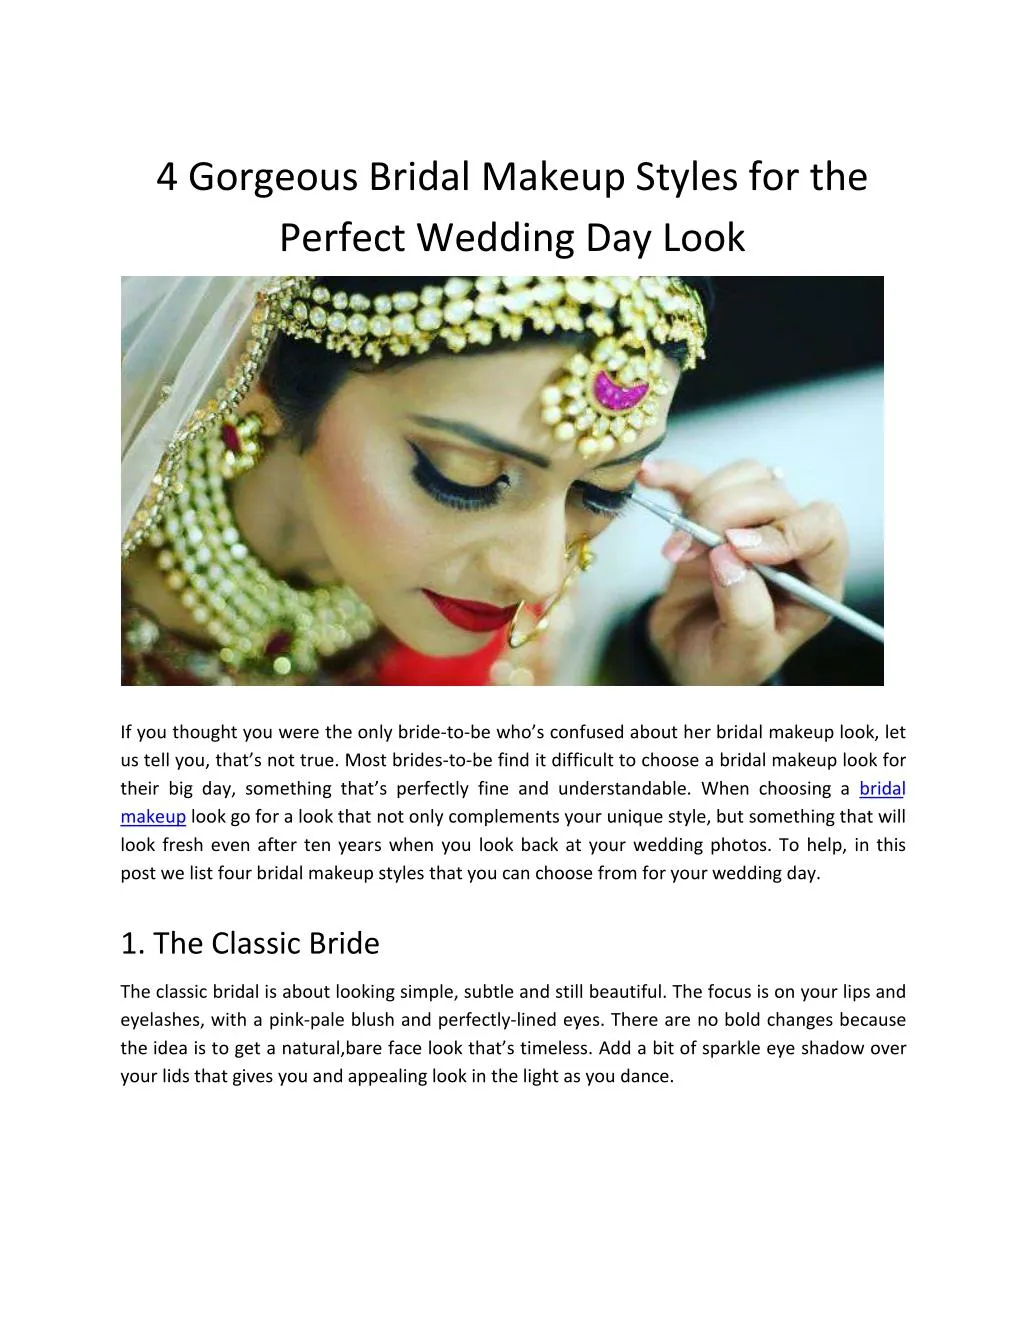 4 gorgeous bridal makeup styles for the perfect